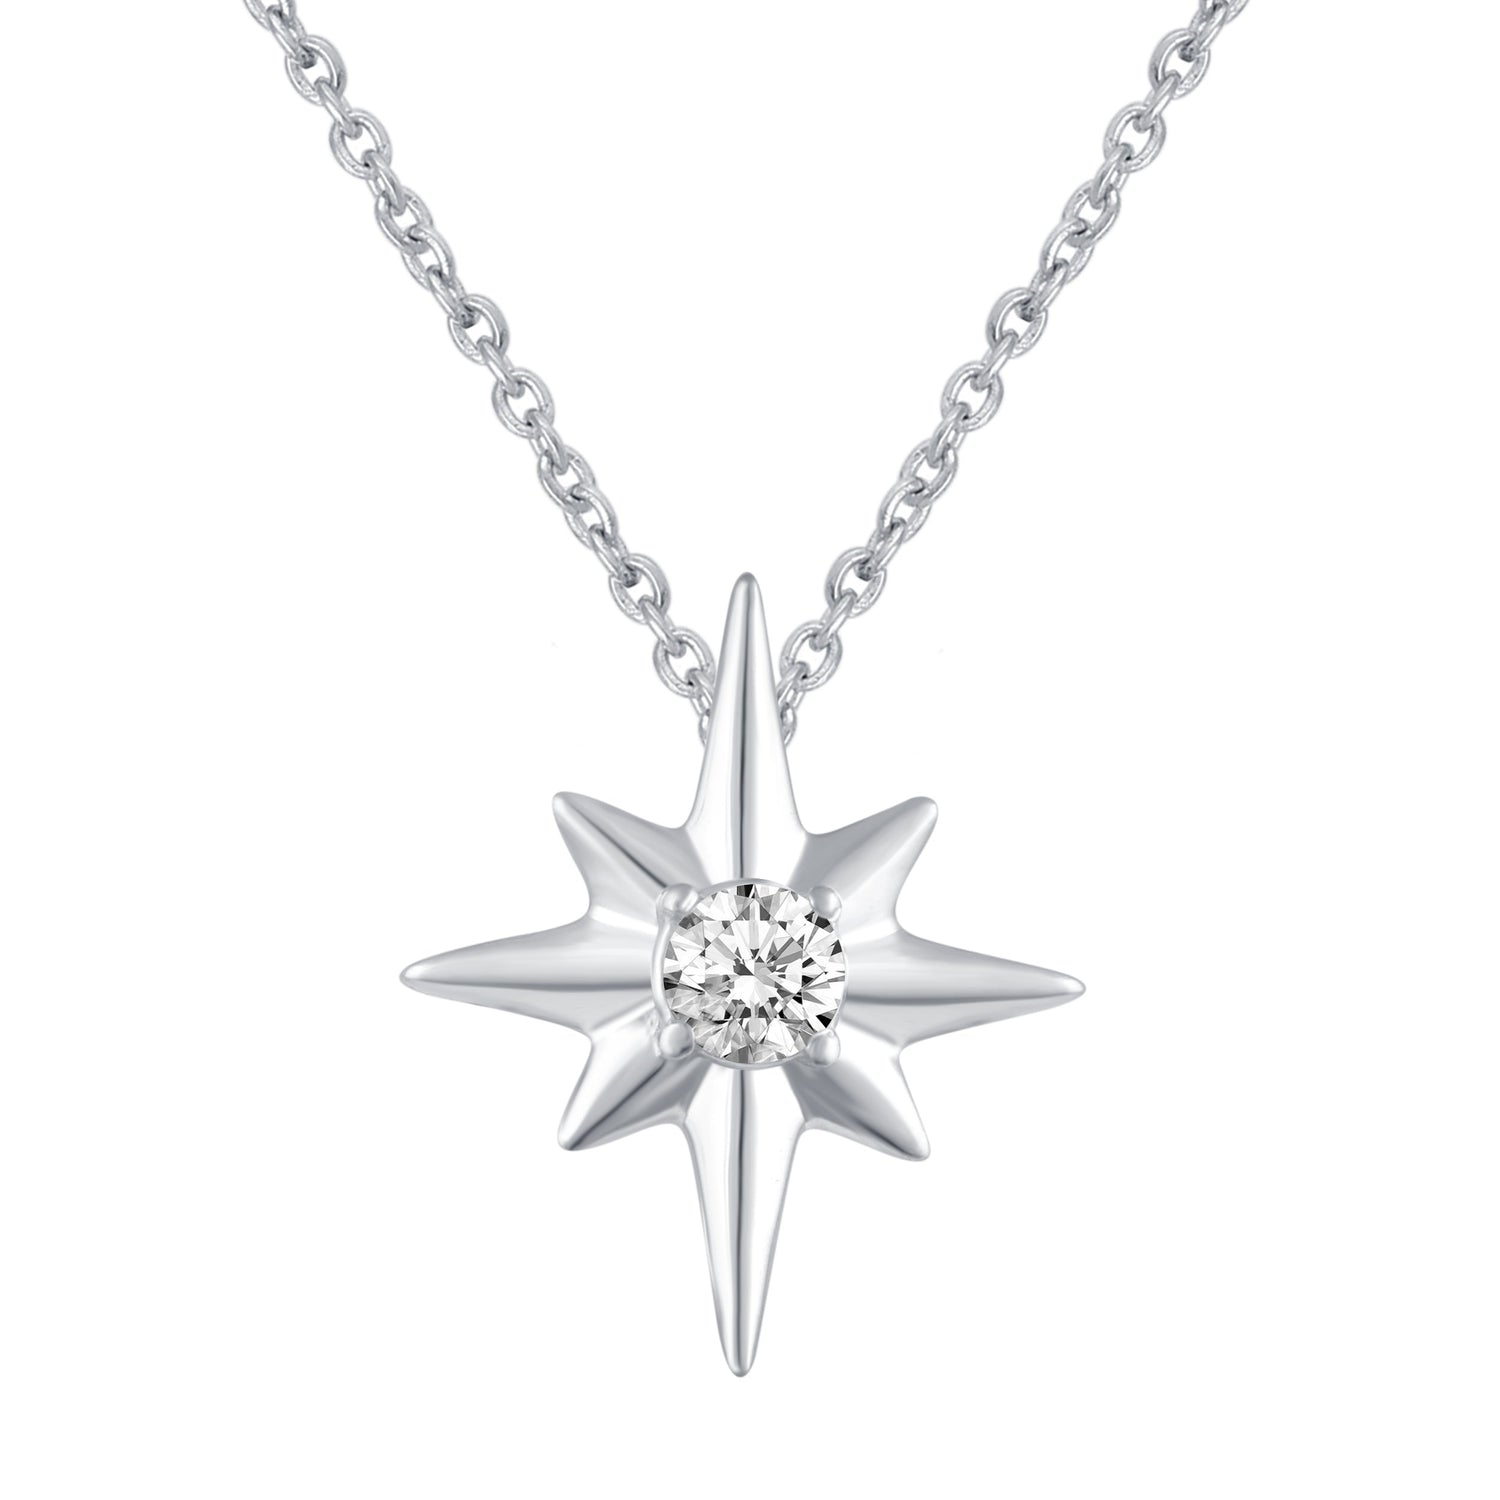 North Star 1/20 Cttw Natural Diamond Pendant Necklace set in 925 Sterling Silver